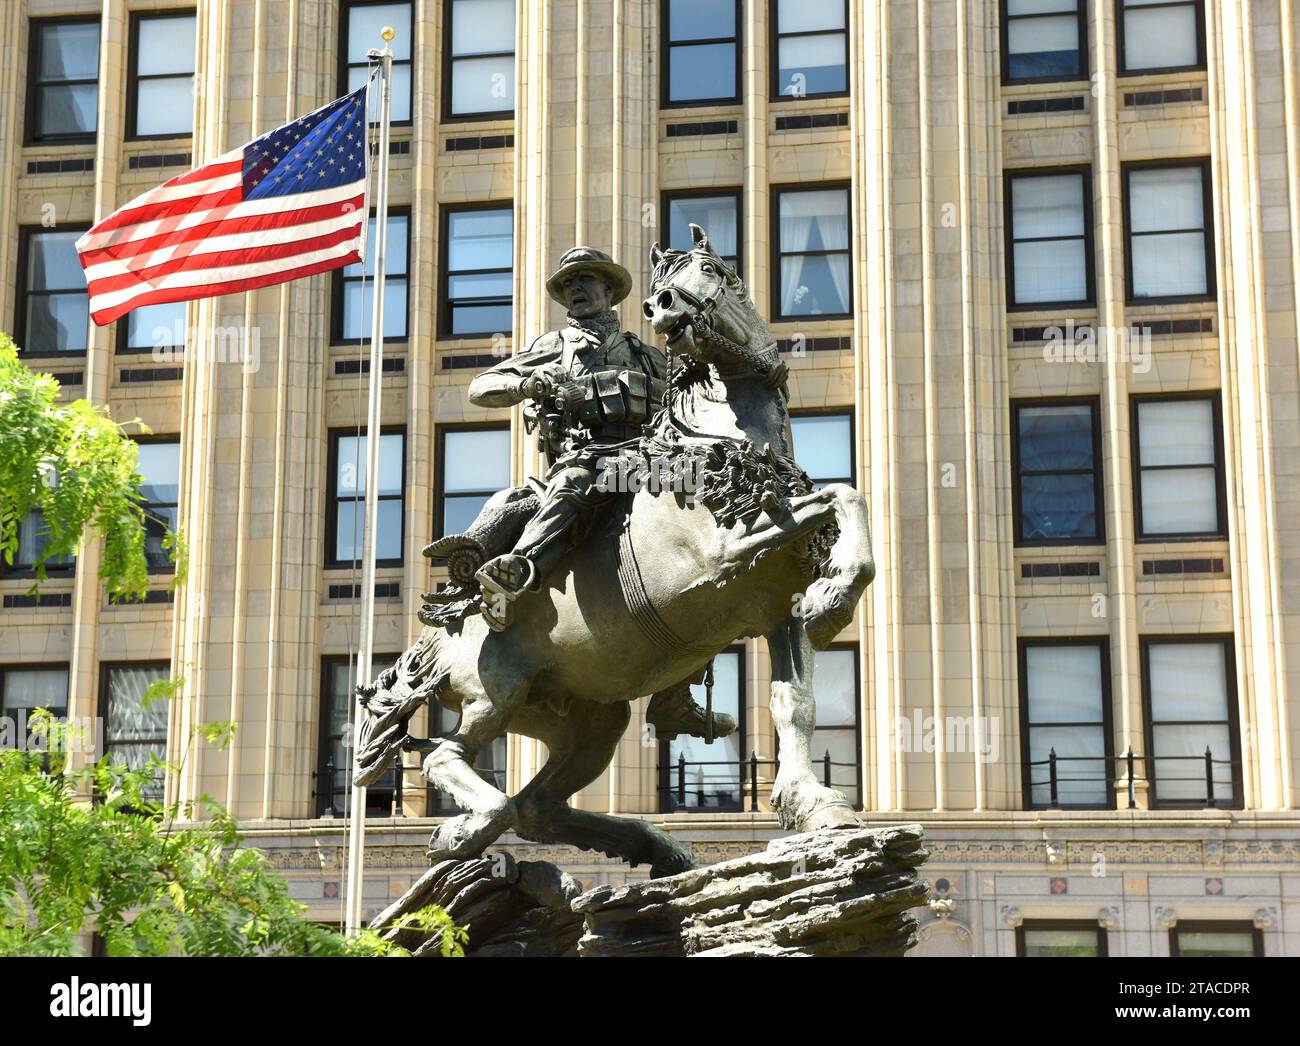 New York, USA - May 24, 2018: America's Response Monument in Liberty Park near NYC 9/11 Memorial in New York. Stock Photo